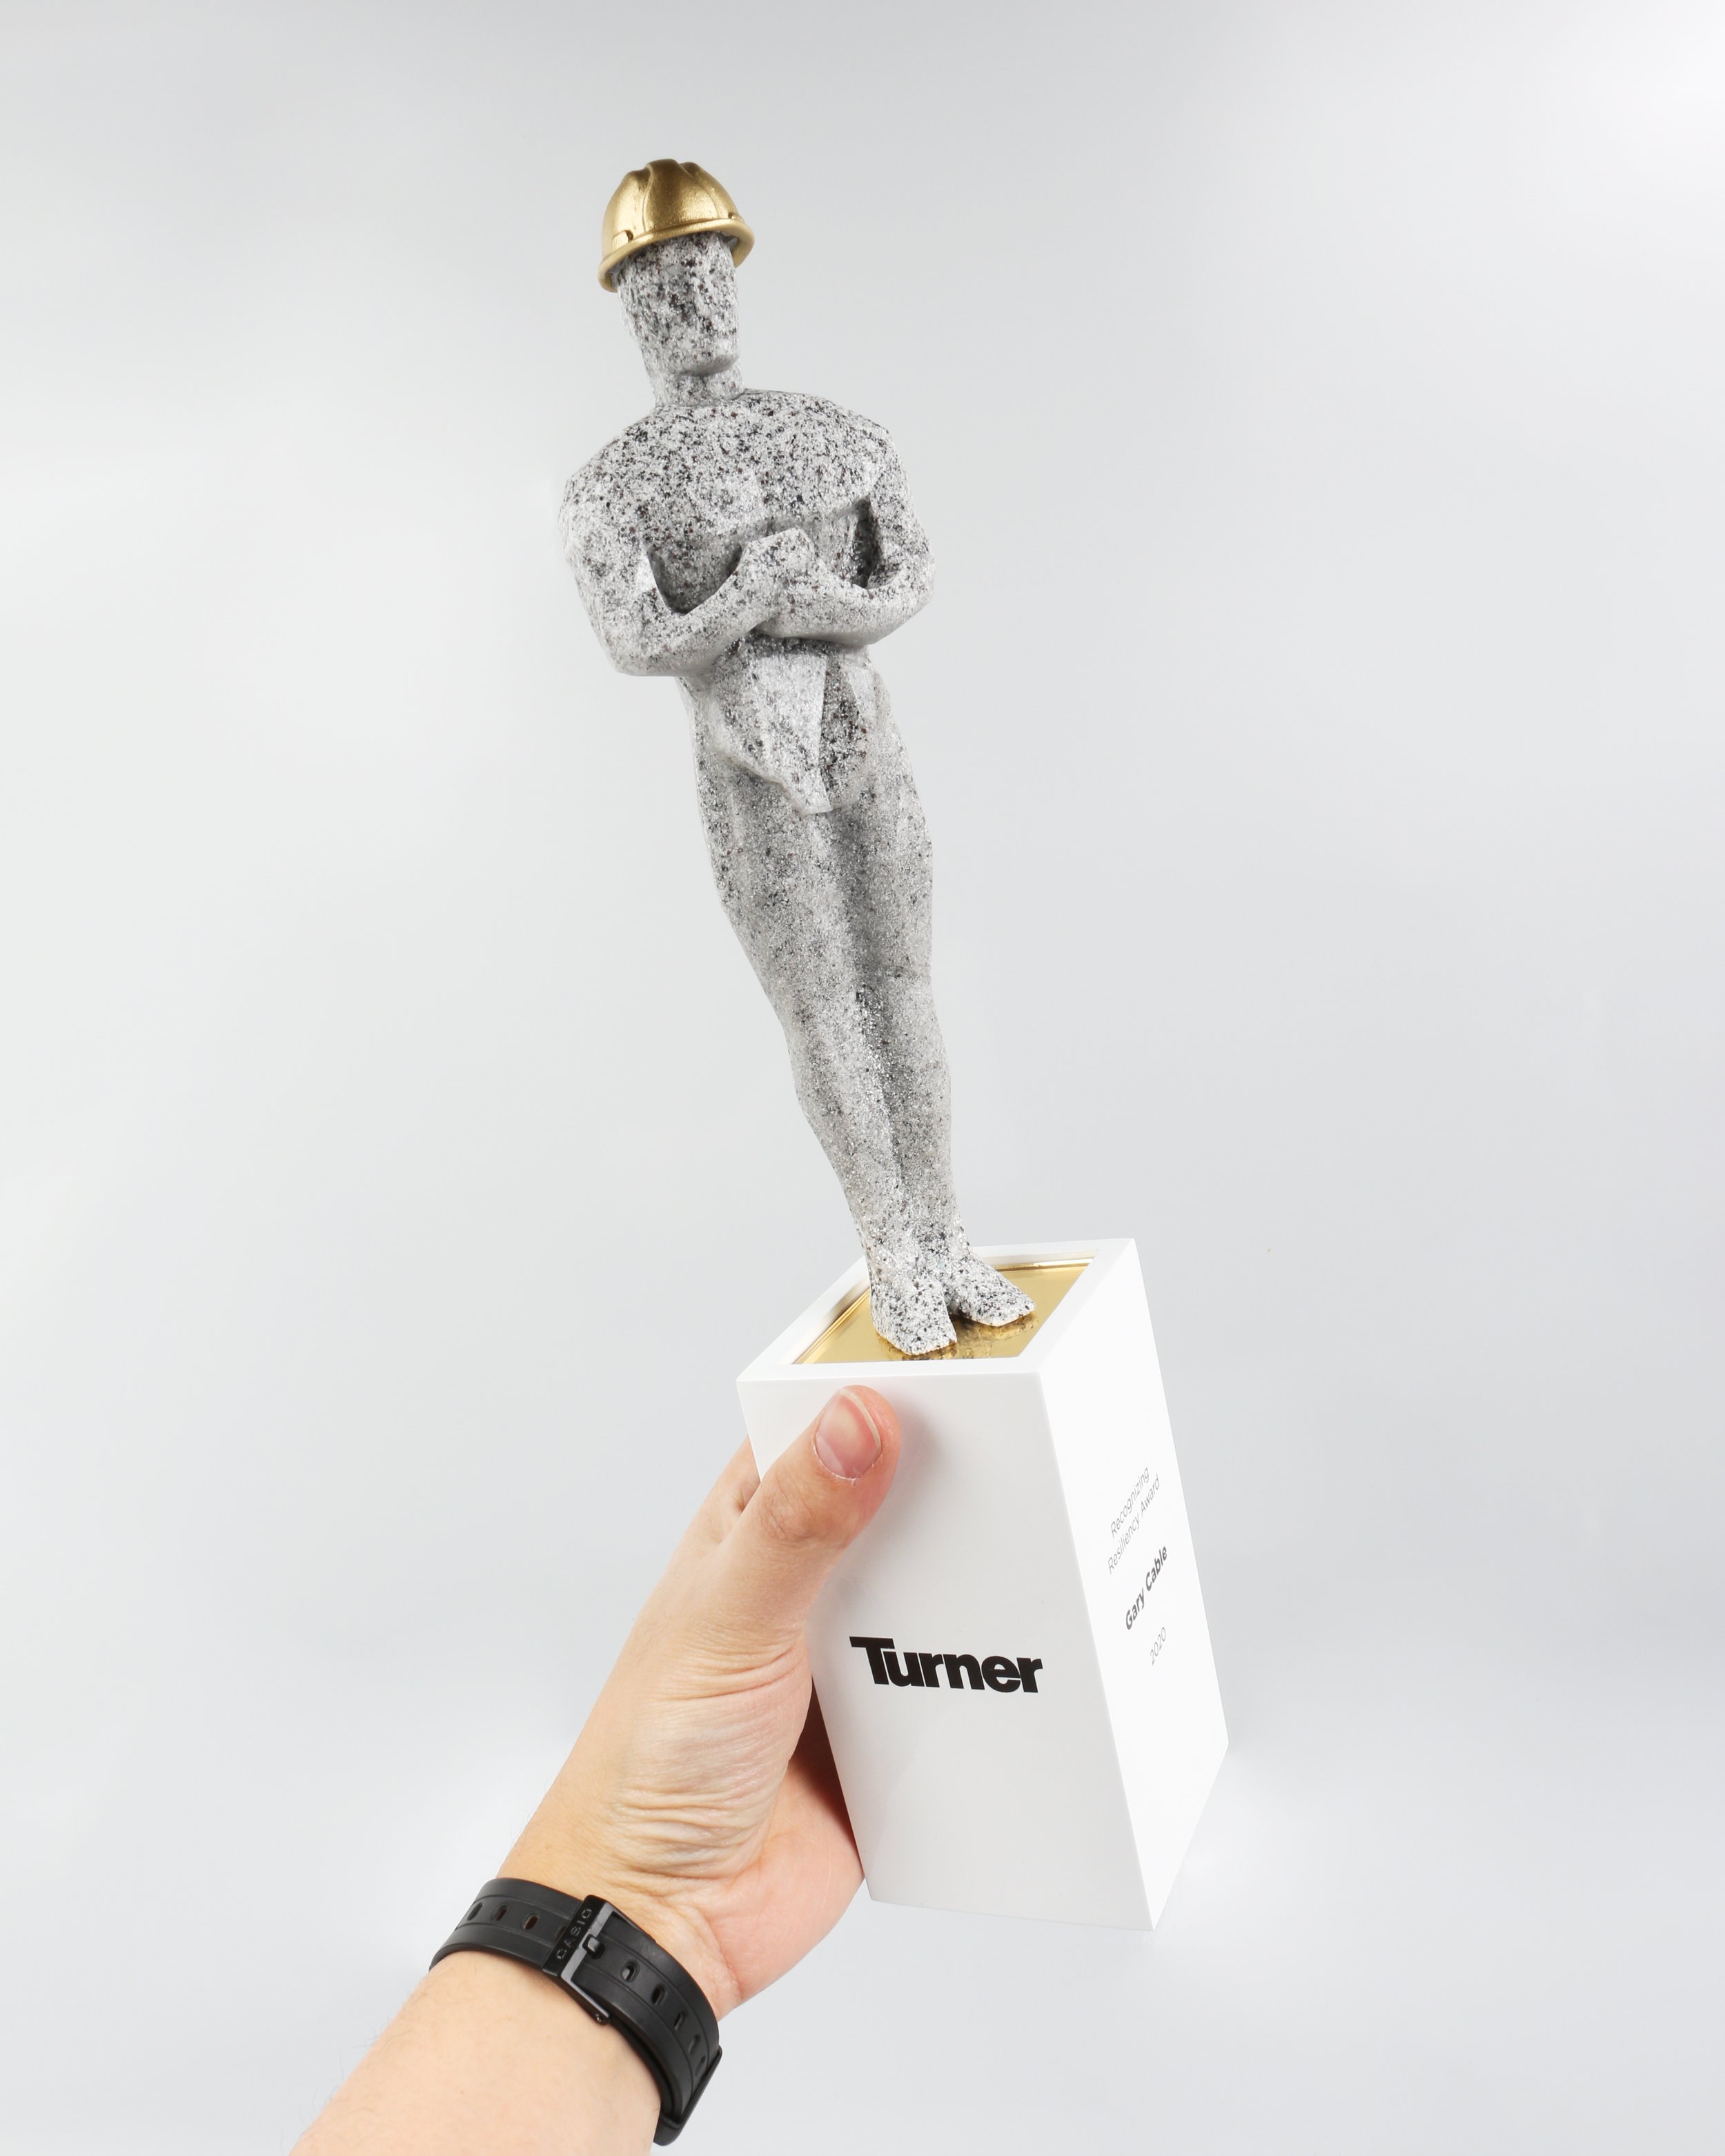 cast resin trophies and awards construction theme modern